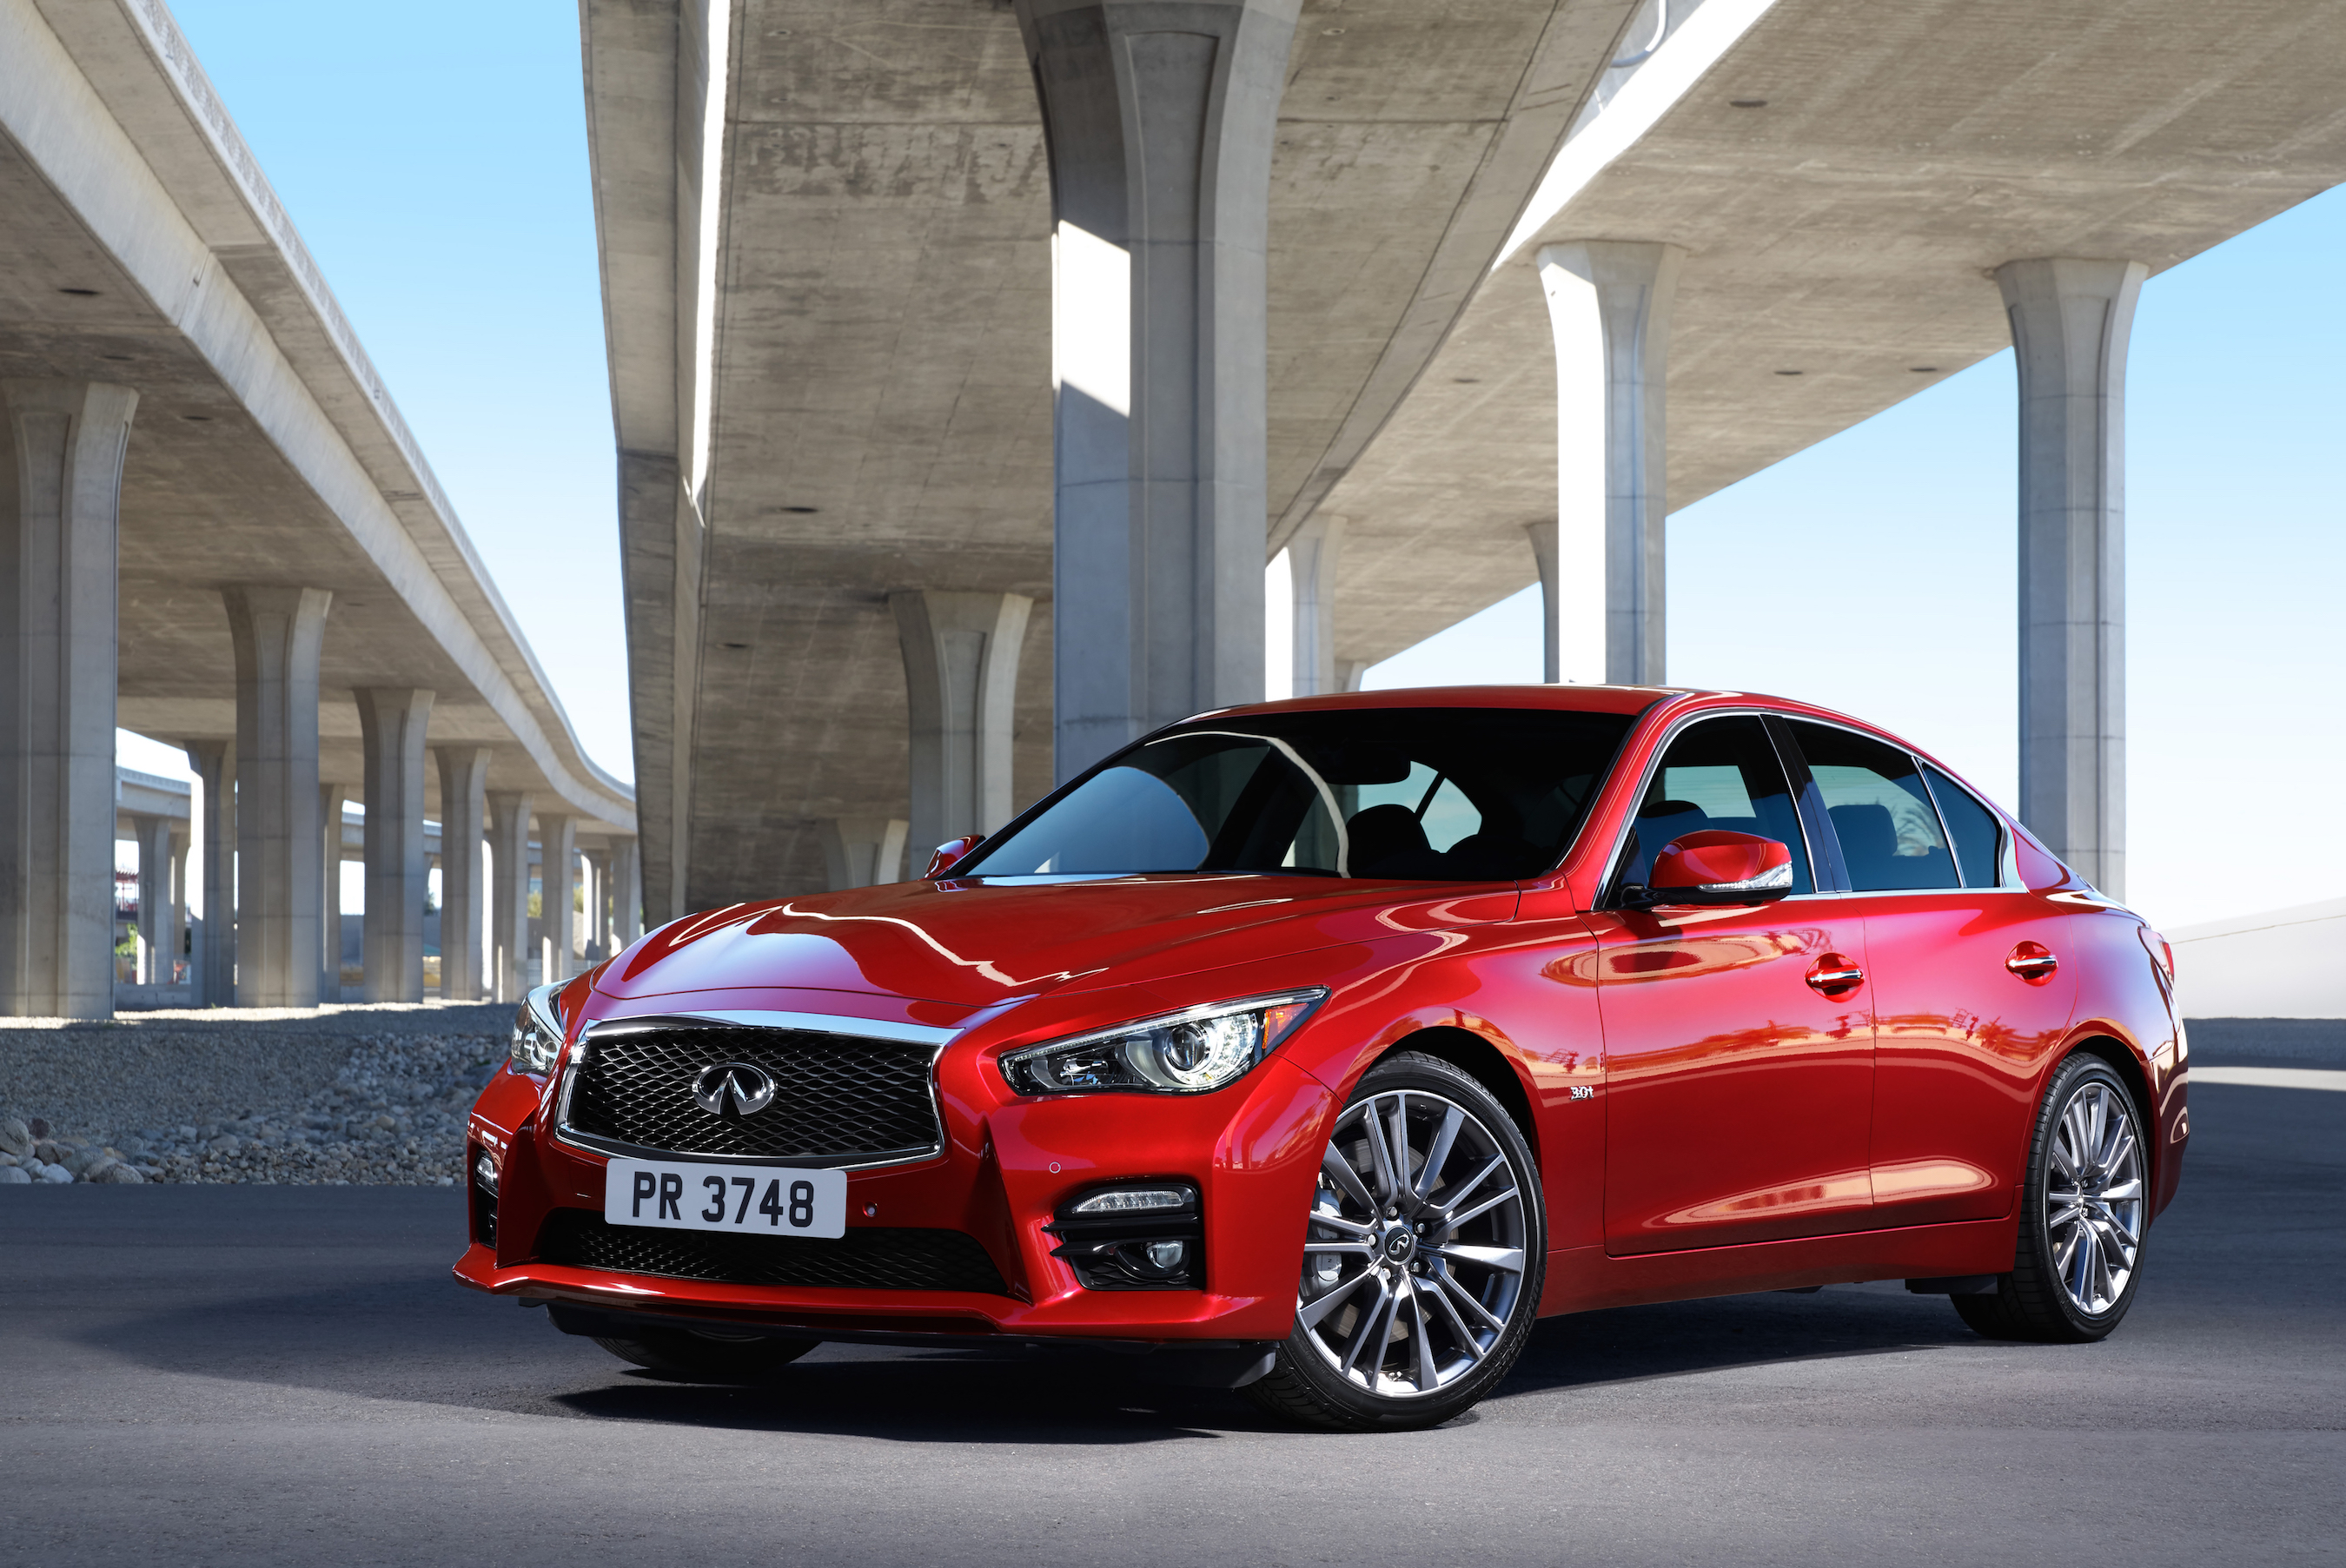 NASHVILLE (Dec. 15, 2016) – The new 2016 Infiniti Q50 sports sedan is being launched with a number of performance and dynamic upgrades that deliver a more empowering and rewarding drive experience. The comprehensive updates include a trio of all-new advanced turbocharged engines, along with next-generation ride and handling technologies.